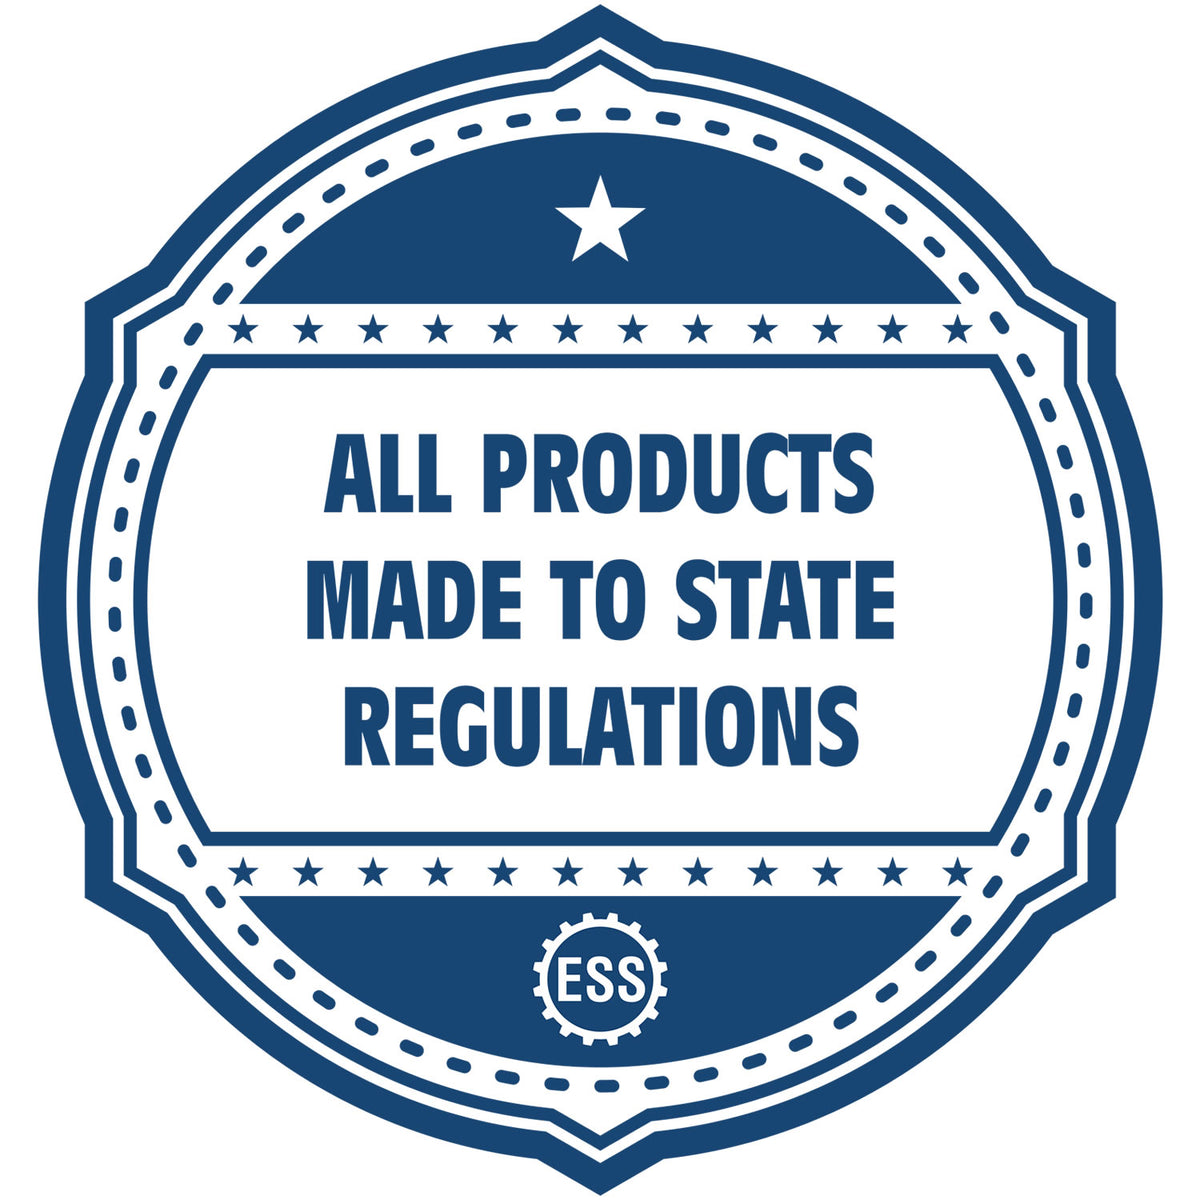 An icon or badge element for the Super Slim Texas Notary Public Stamp showing that this product is made in compliance with state regulations.